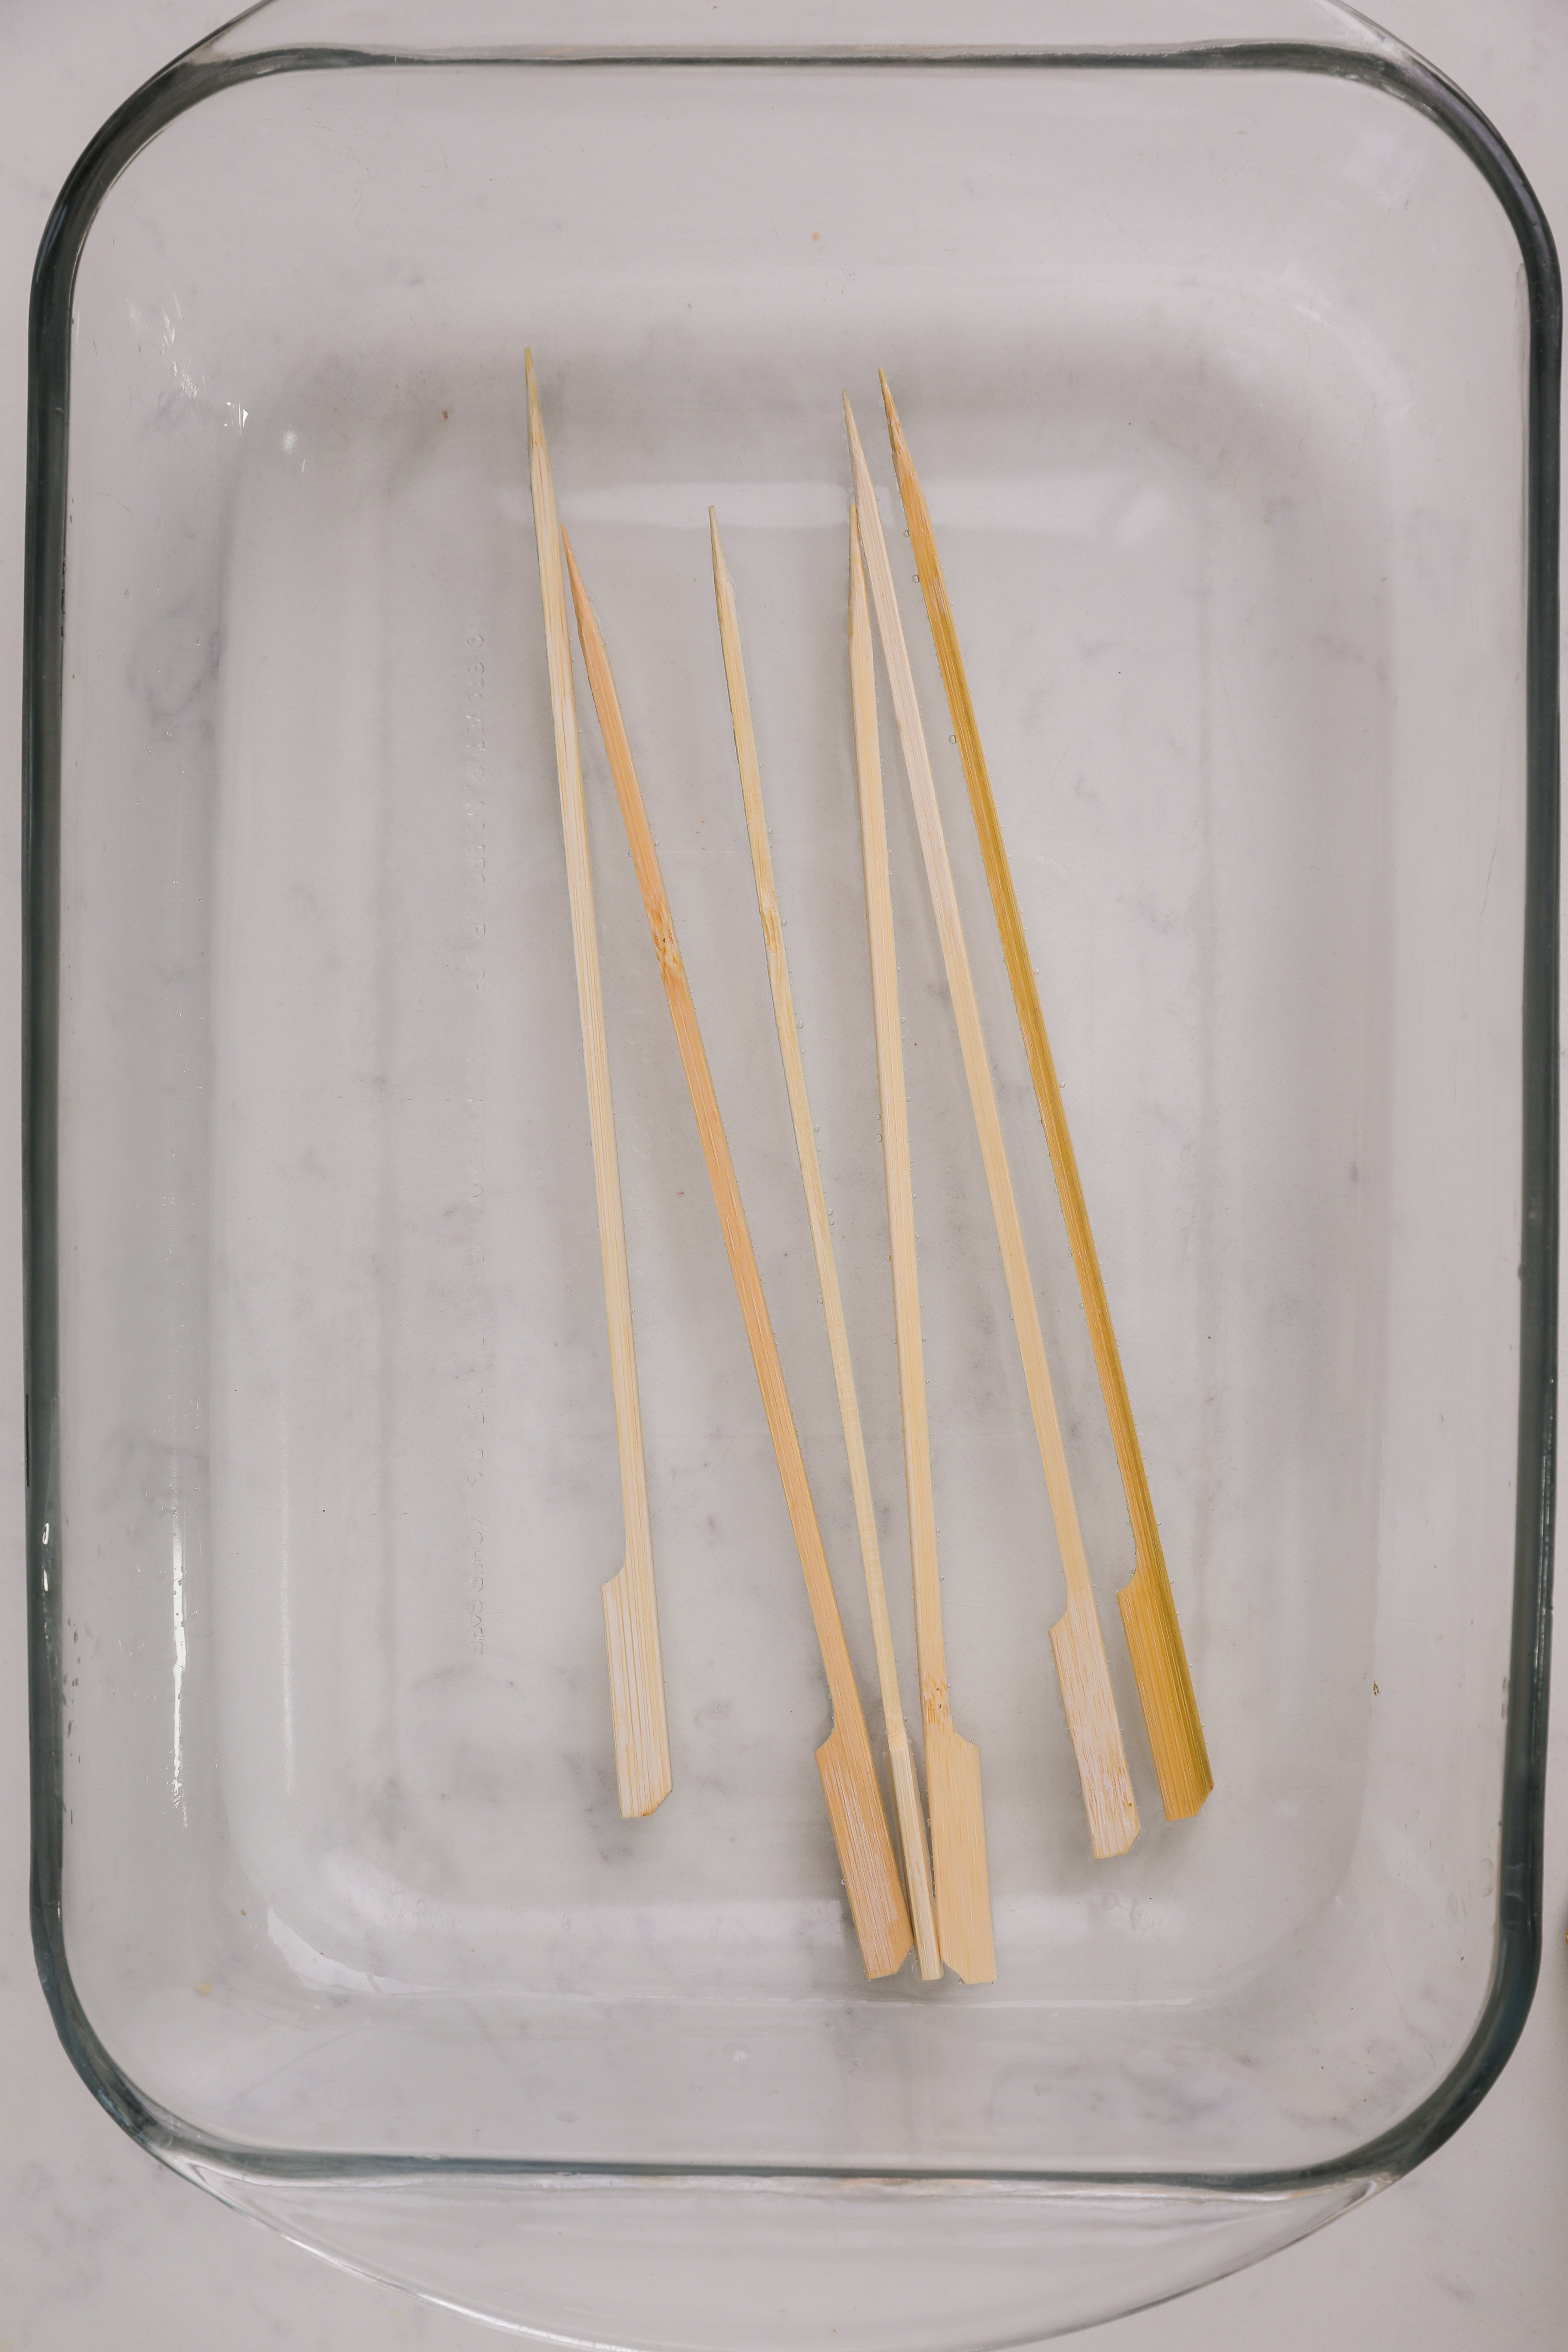 Six wooden skewers submerged in water in a glass container.